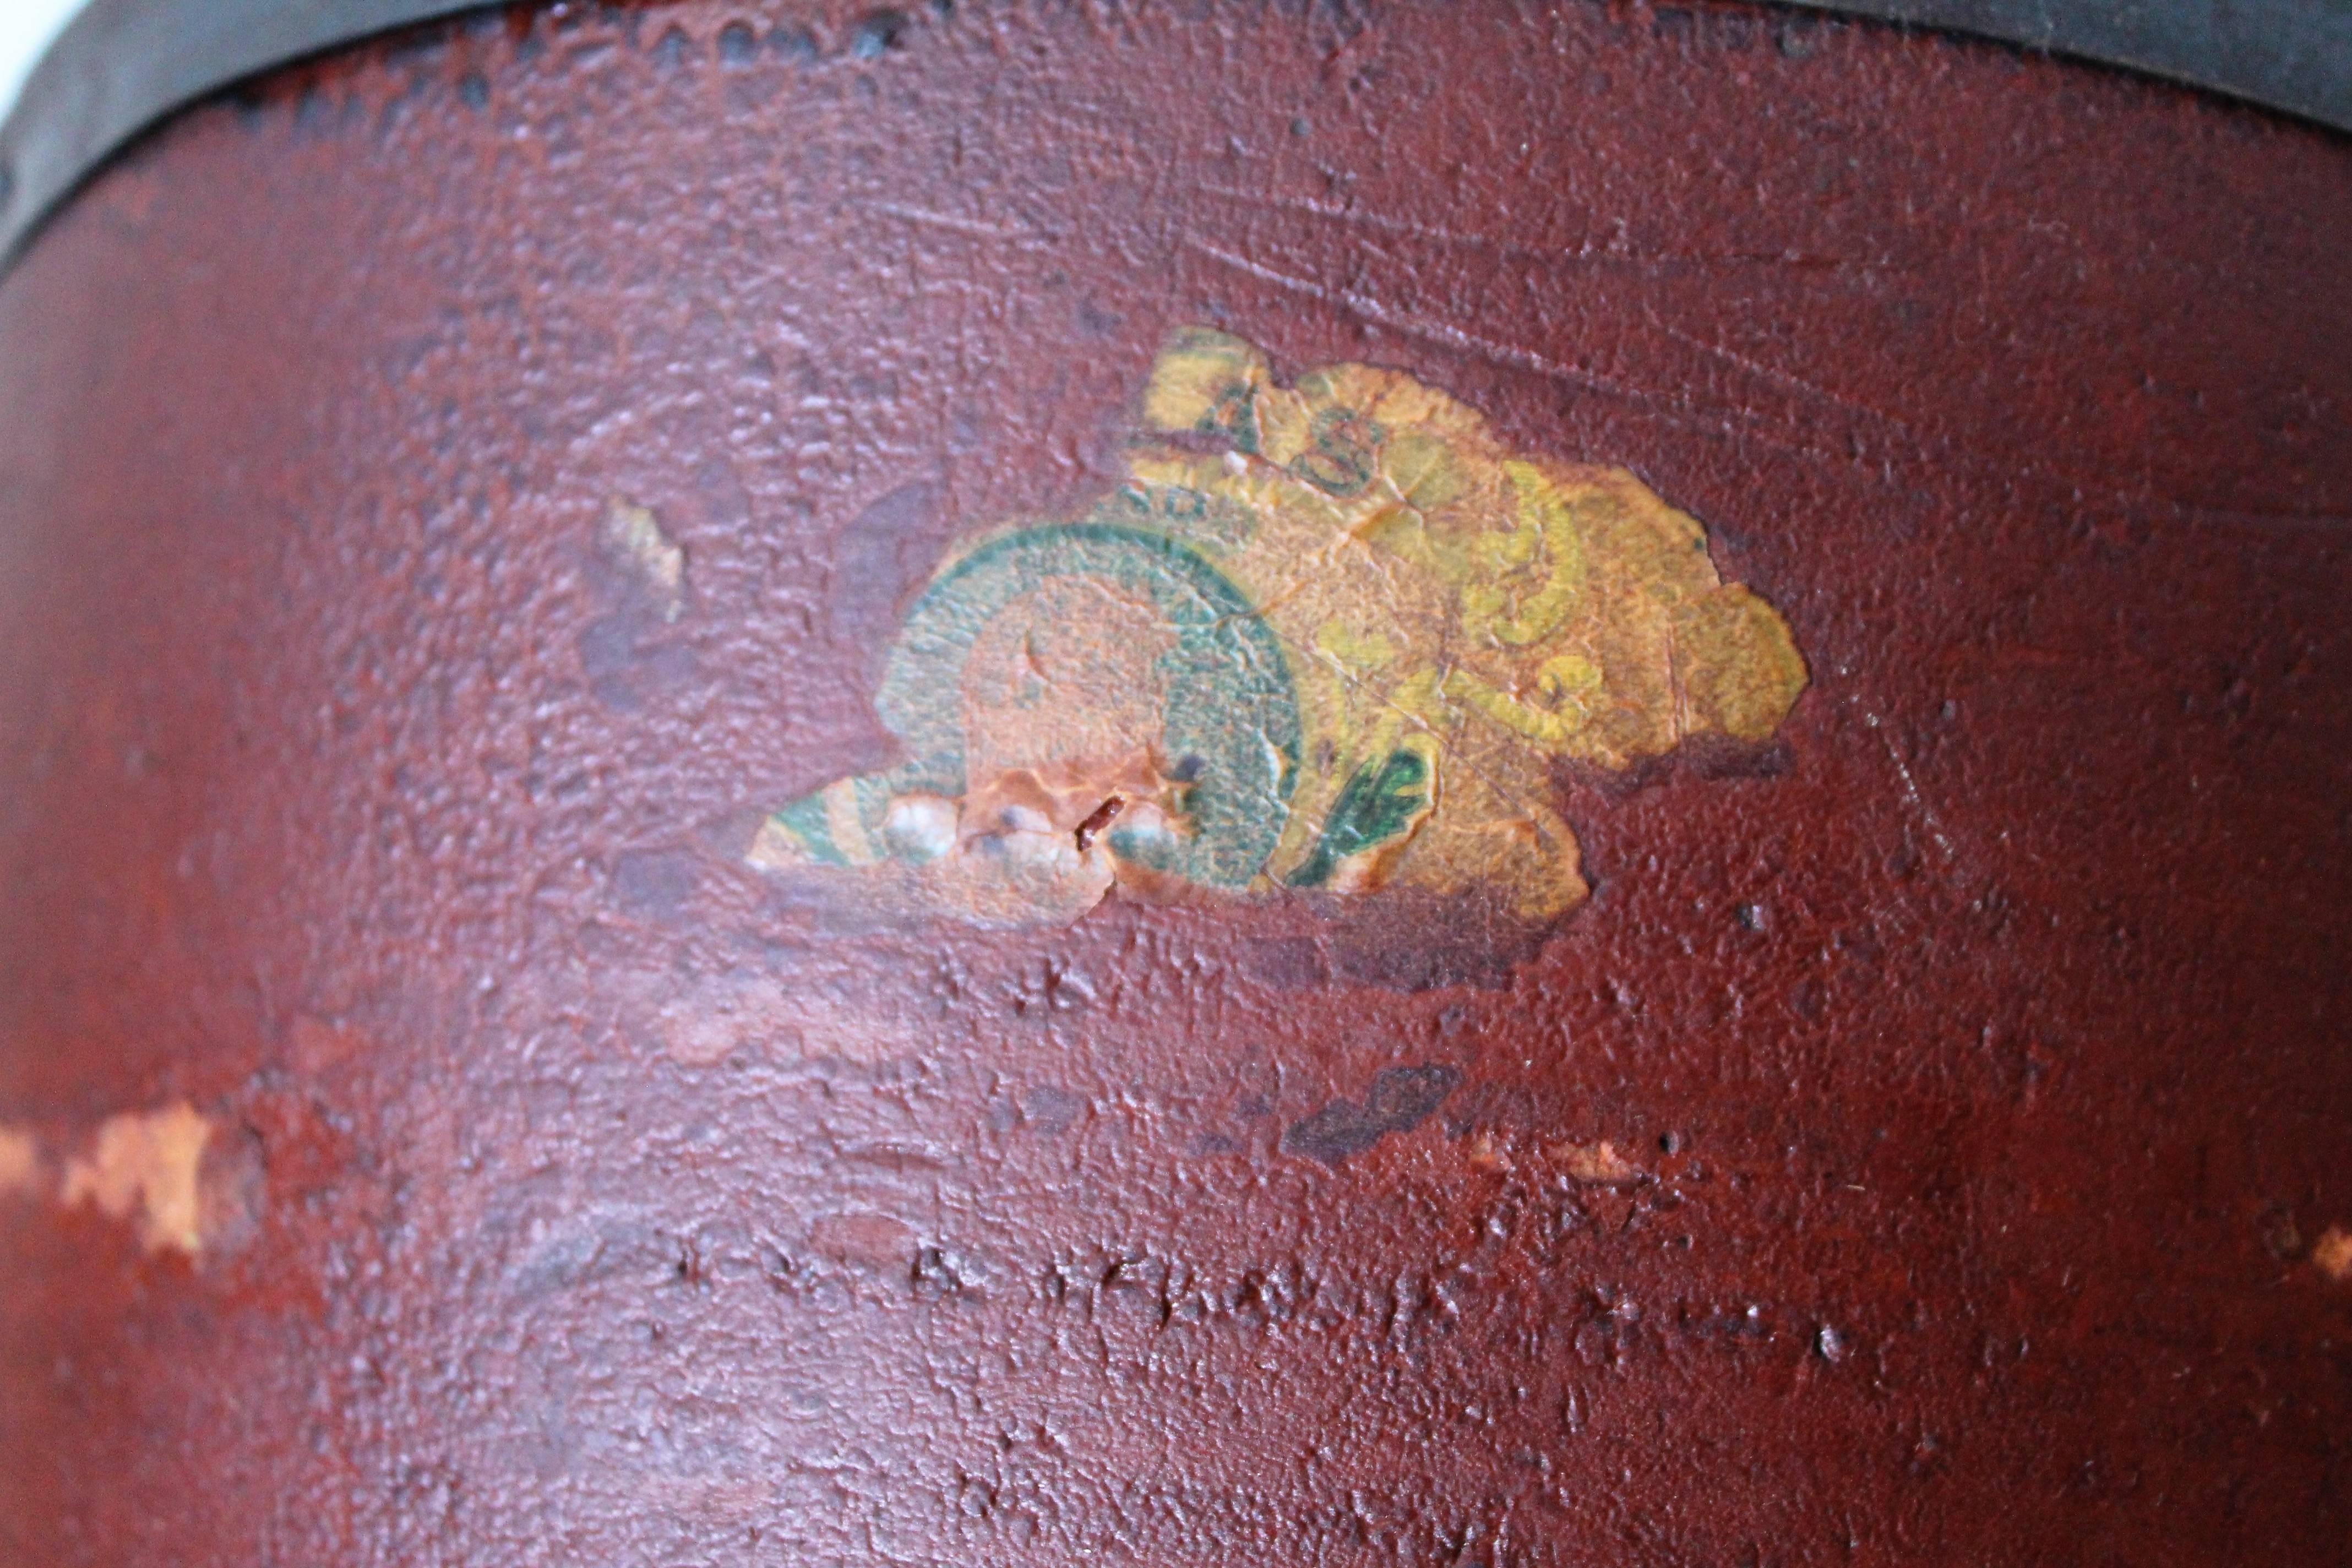 19th century original red painted fibre wood bucket in good condition. Signed and dated United Indurated Fibre Co. and dated May 24th, 1886. There is wear and chips on edge consistent from age and use. This is a usable bucket. Fantastic aged patina.